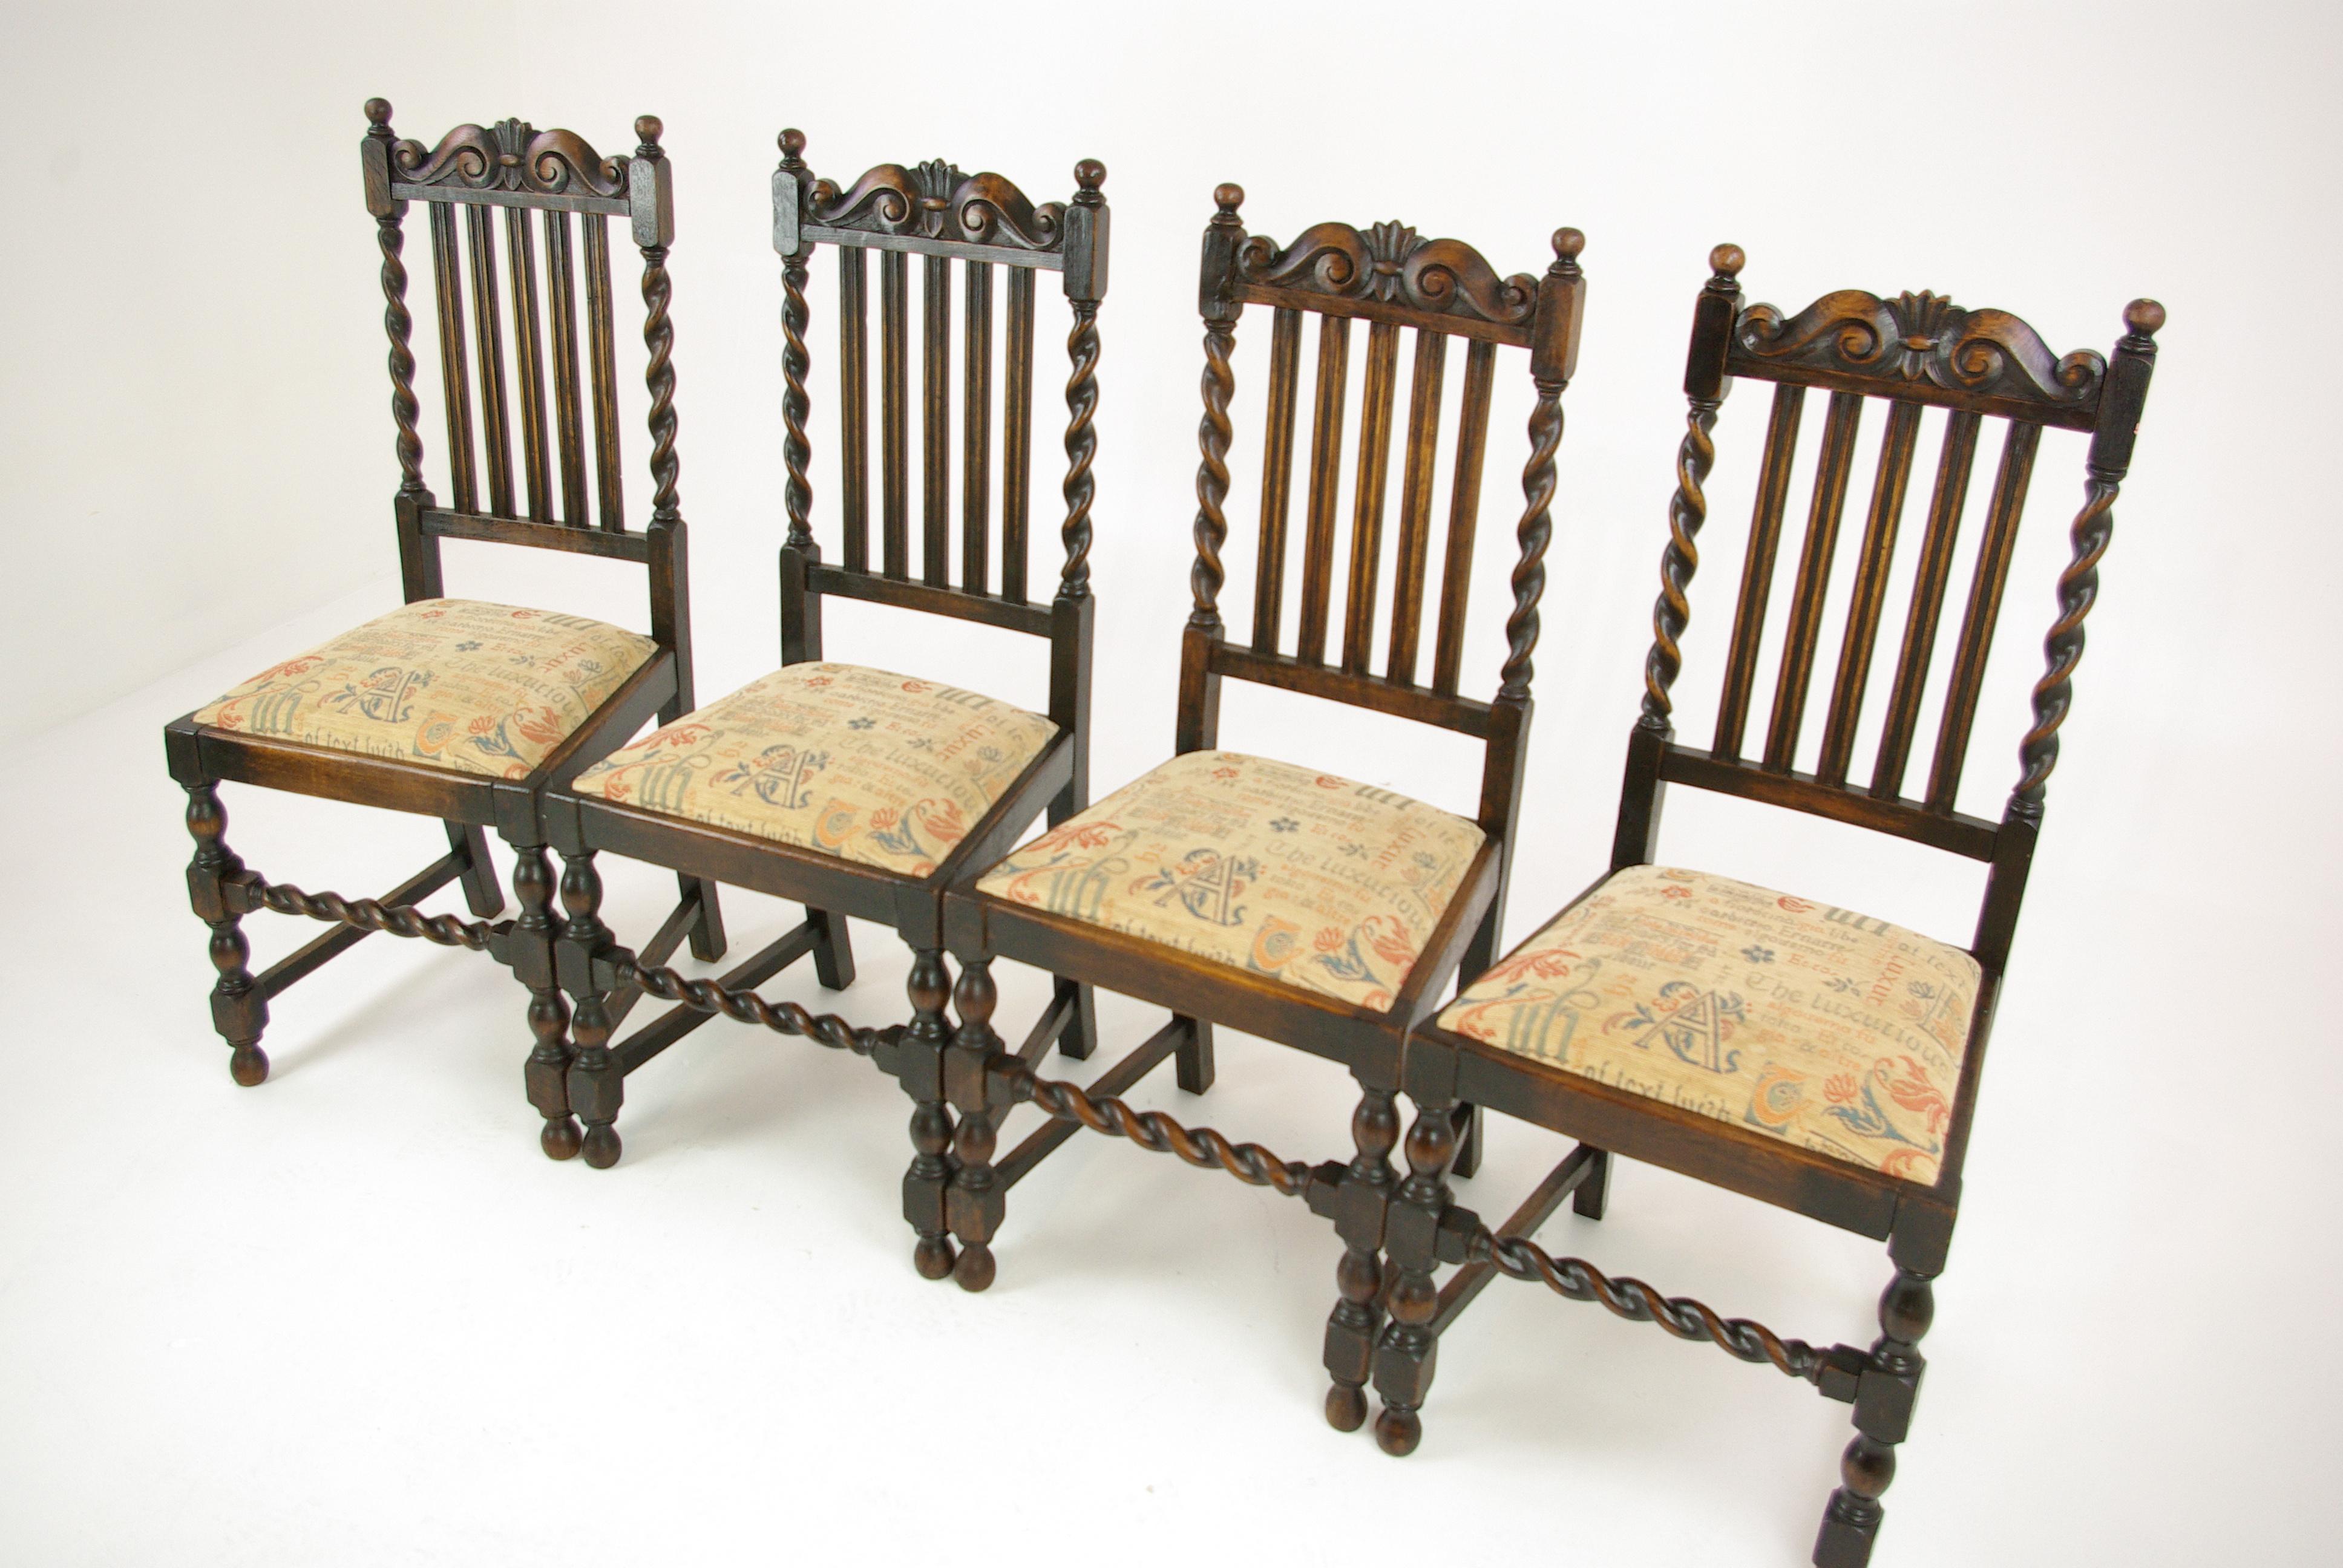 4 antique dining chairs, barley twist oak dining chairs, Scotland, 1920s, Antique Furniture, B1360

Scotland, 1920s
Solid oak construction
Original finish
Carved top rail
Vertical slats below
Supported by barley twist supports
Drop in seat